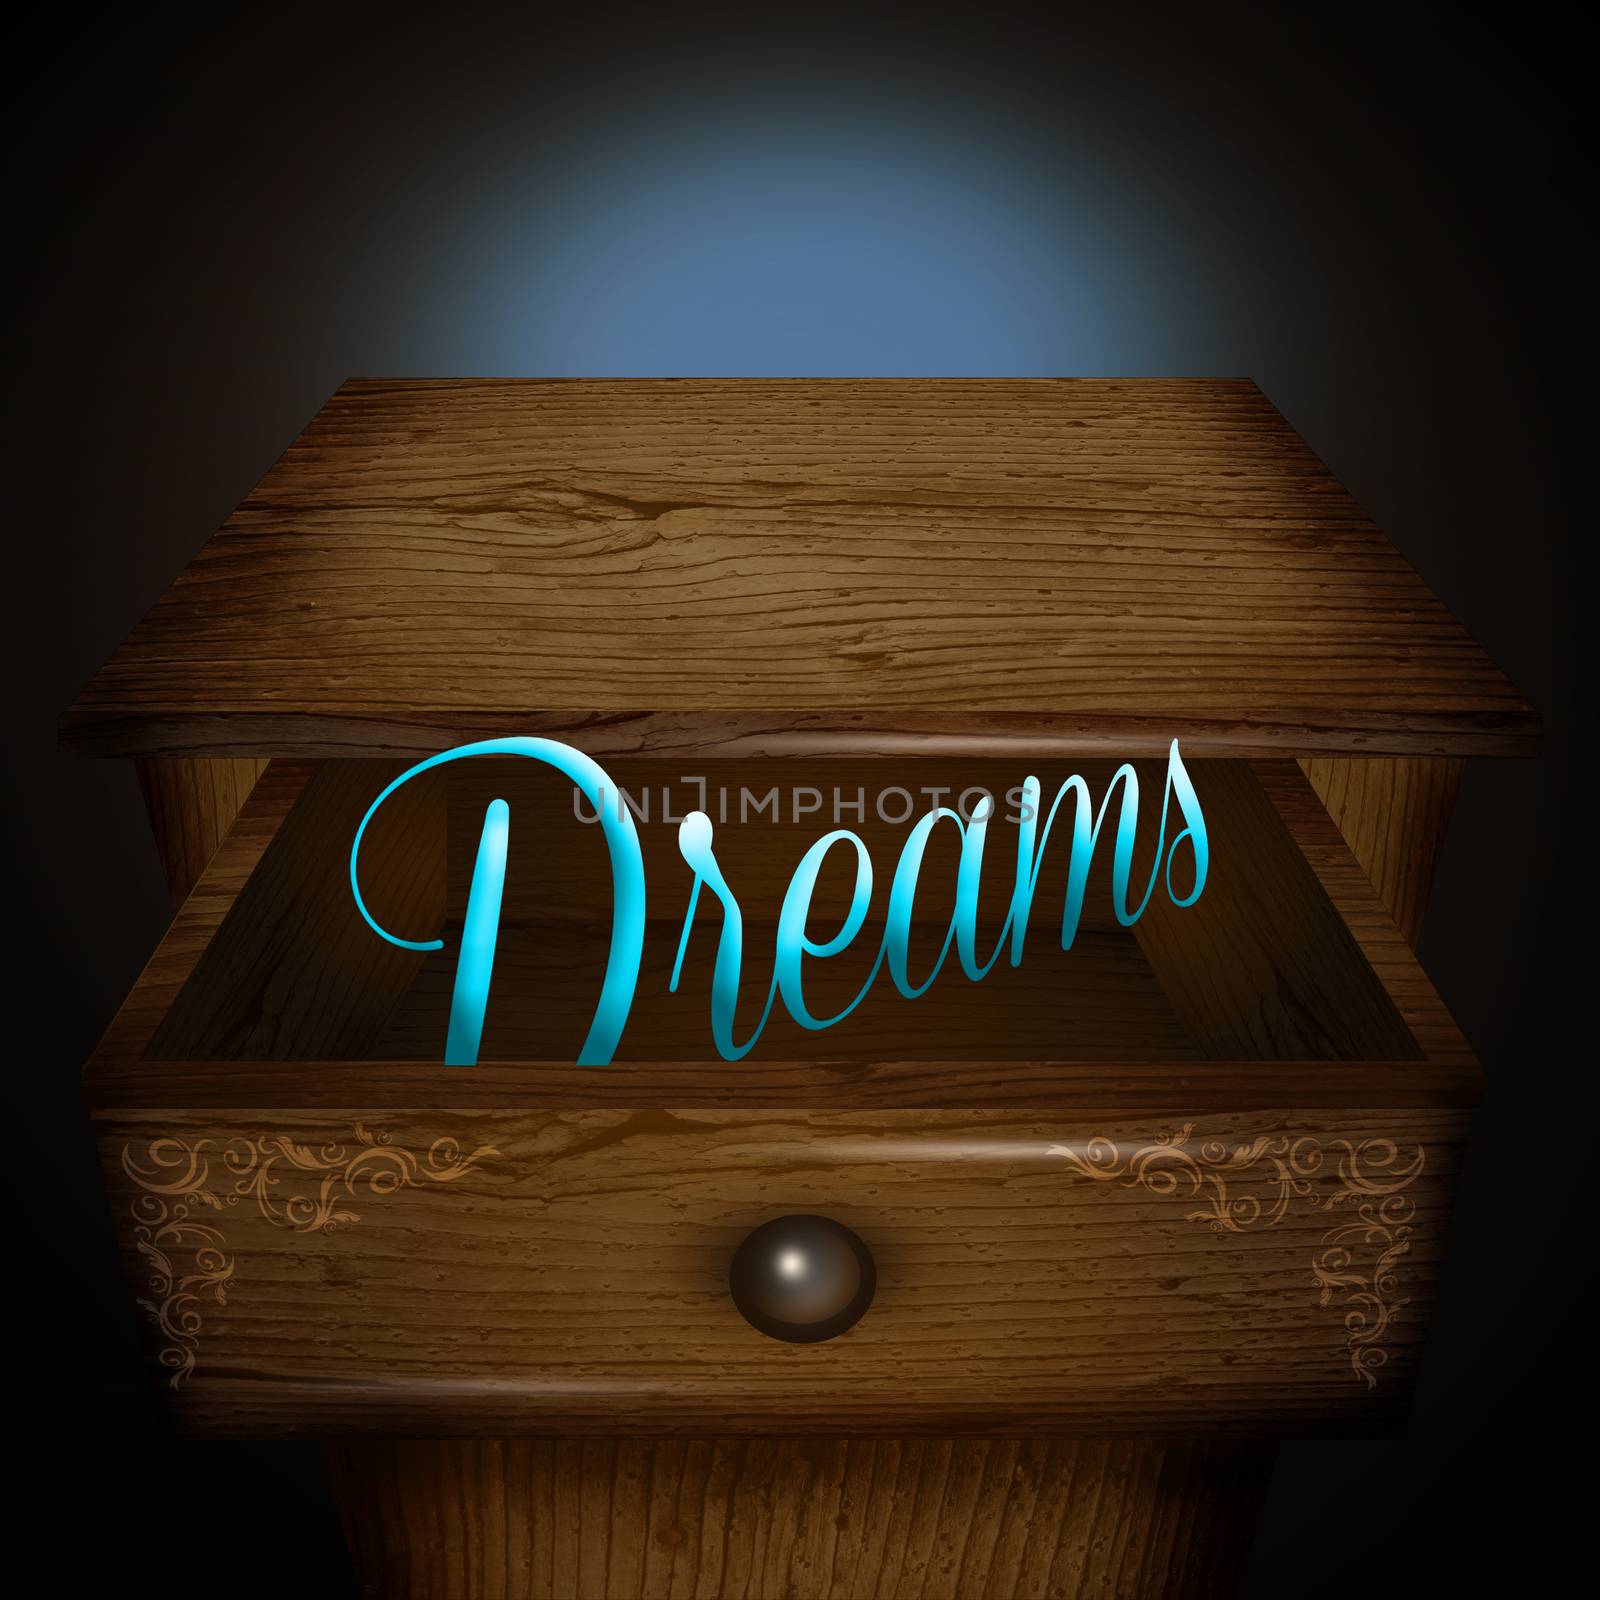 illustration of Dreams in the drawer